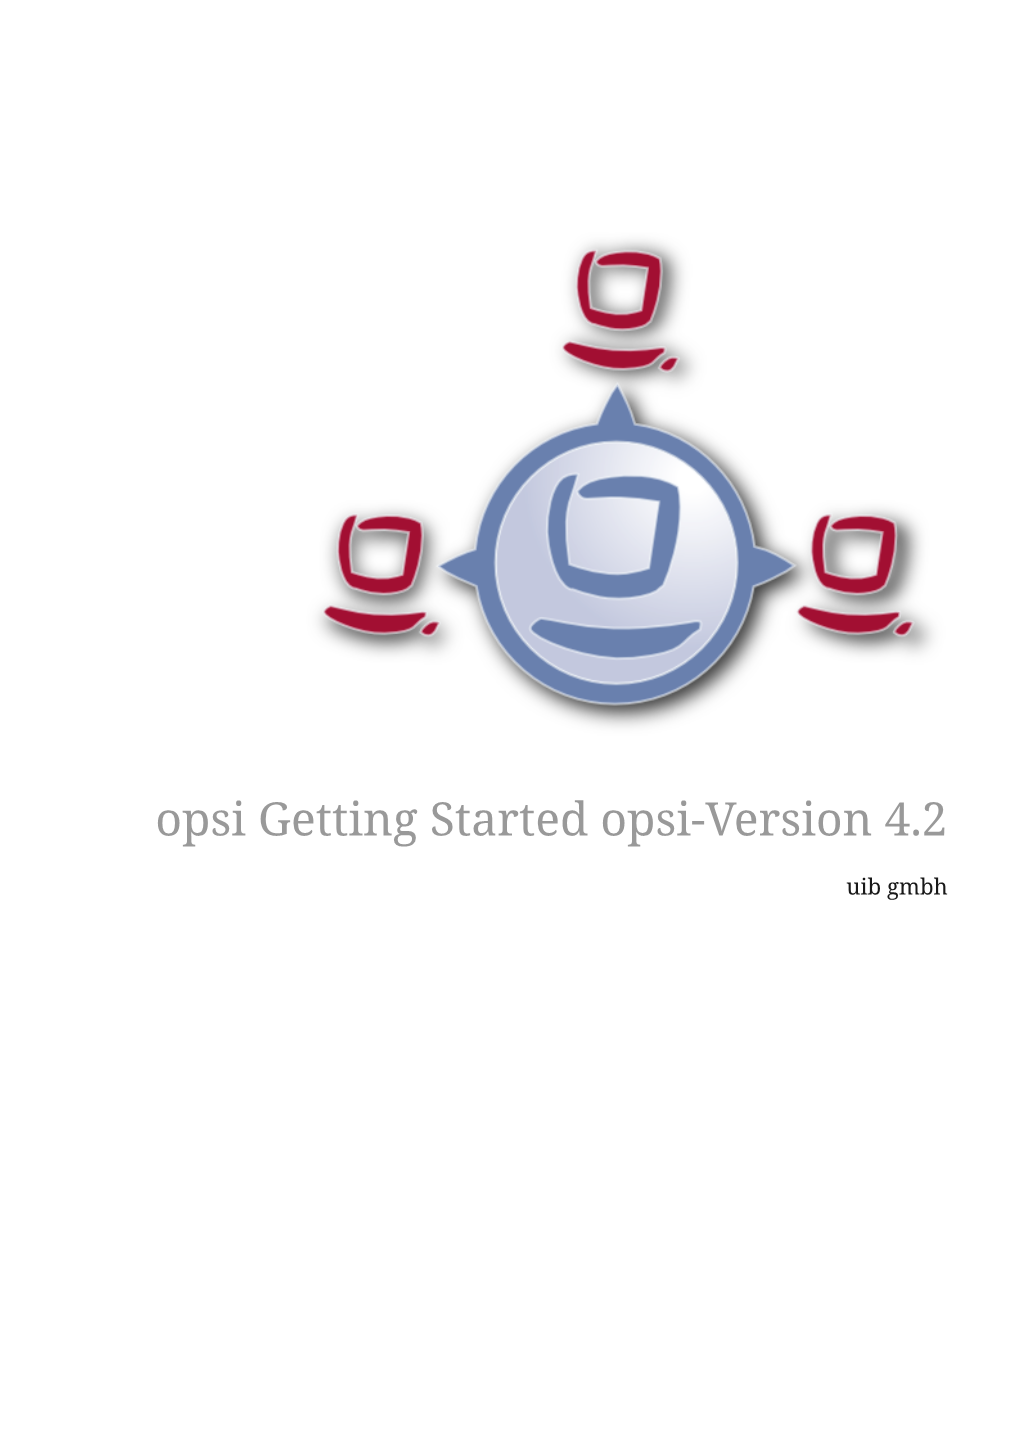 Opsi Getting Started Opsi-Version 4.2